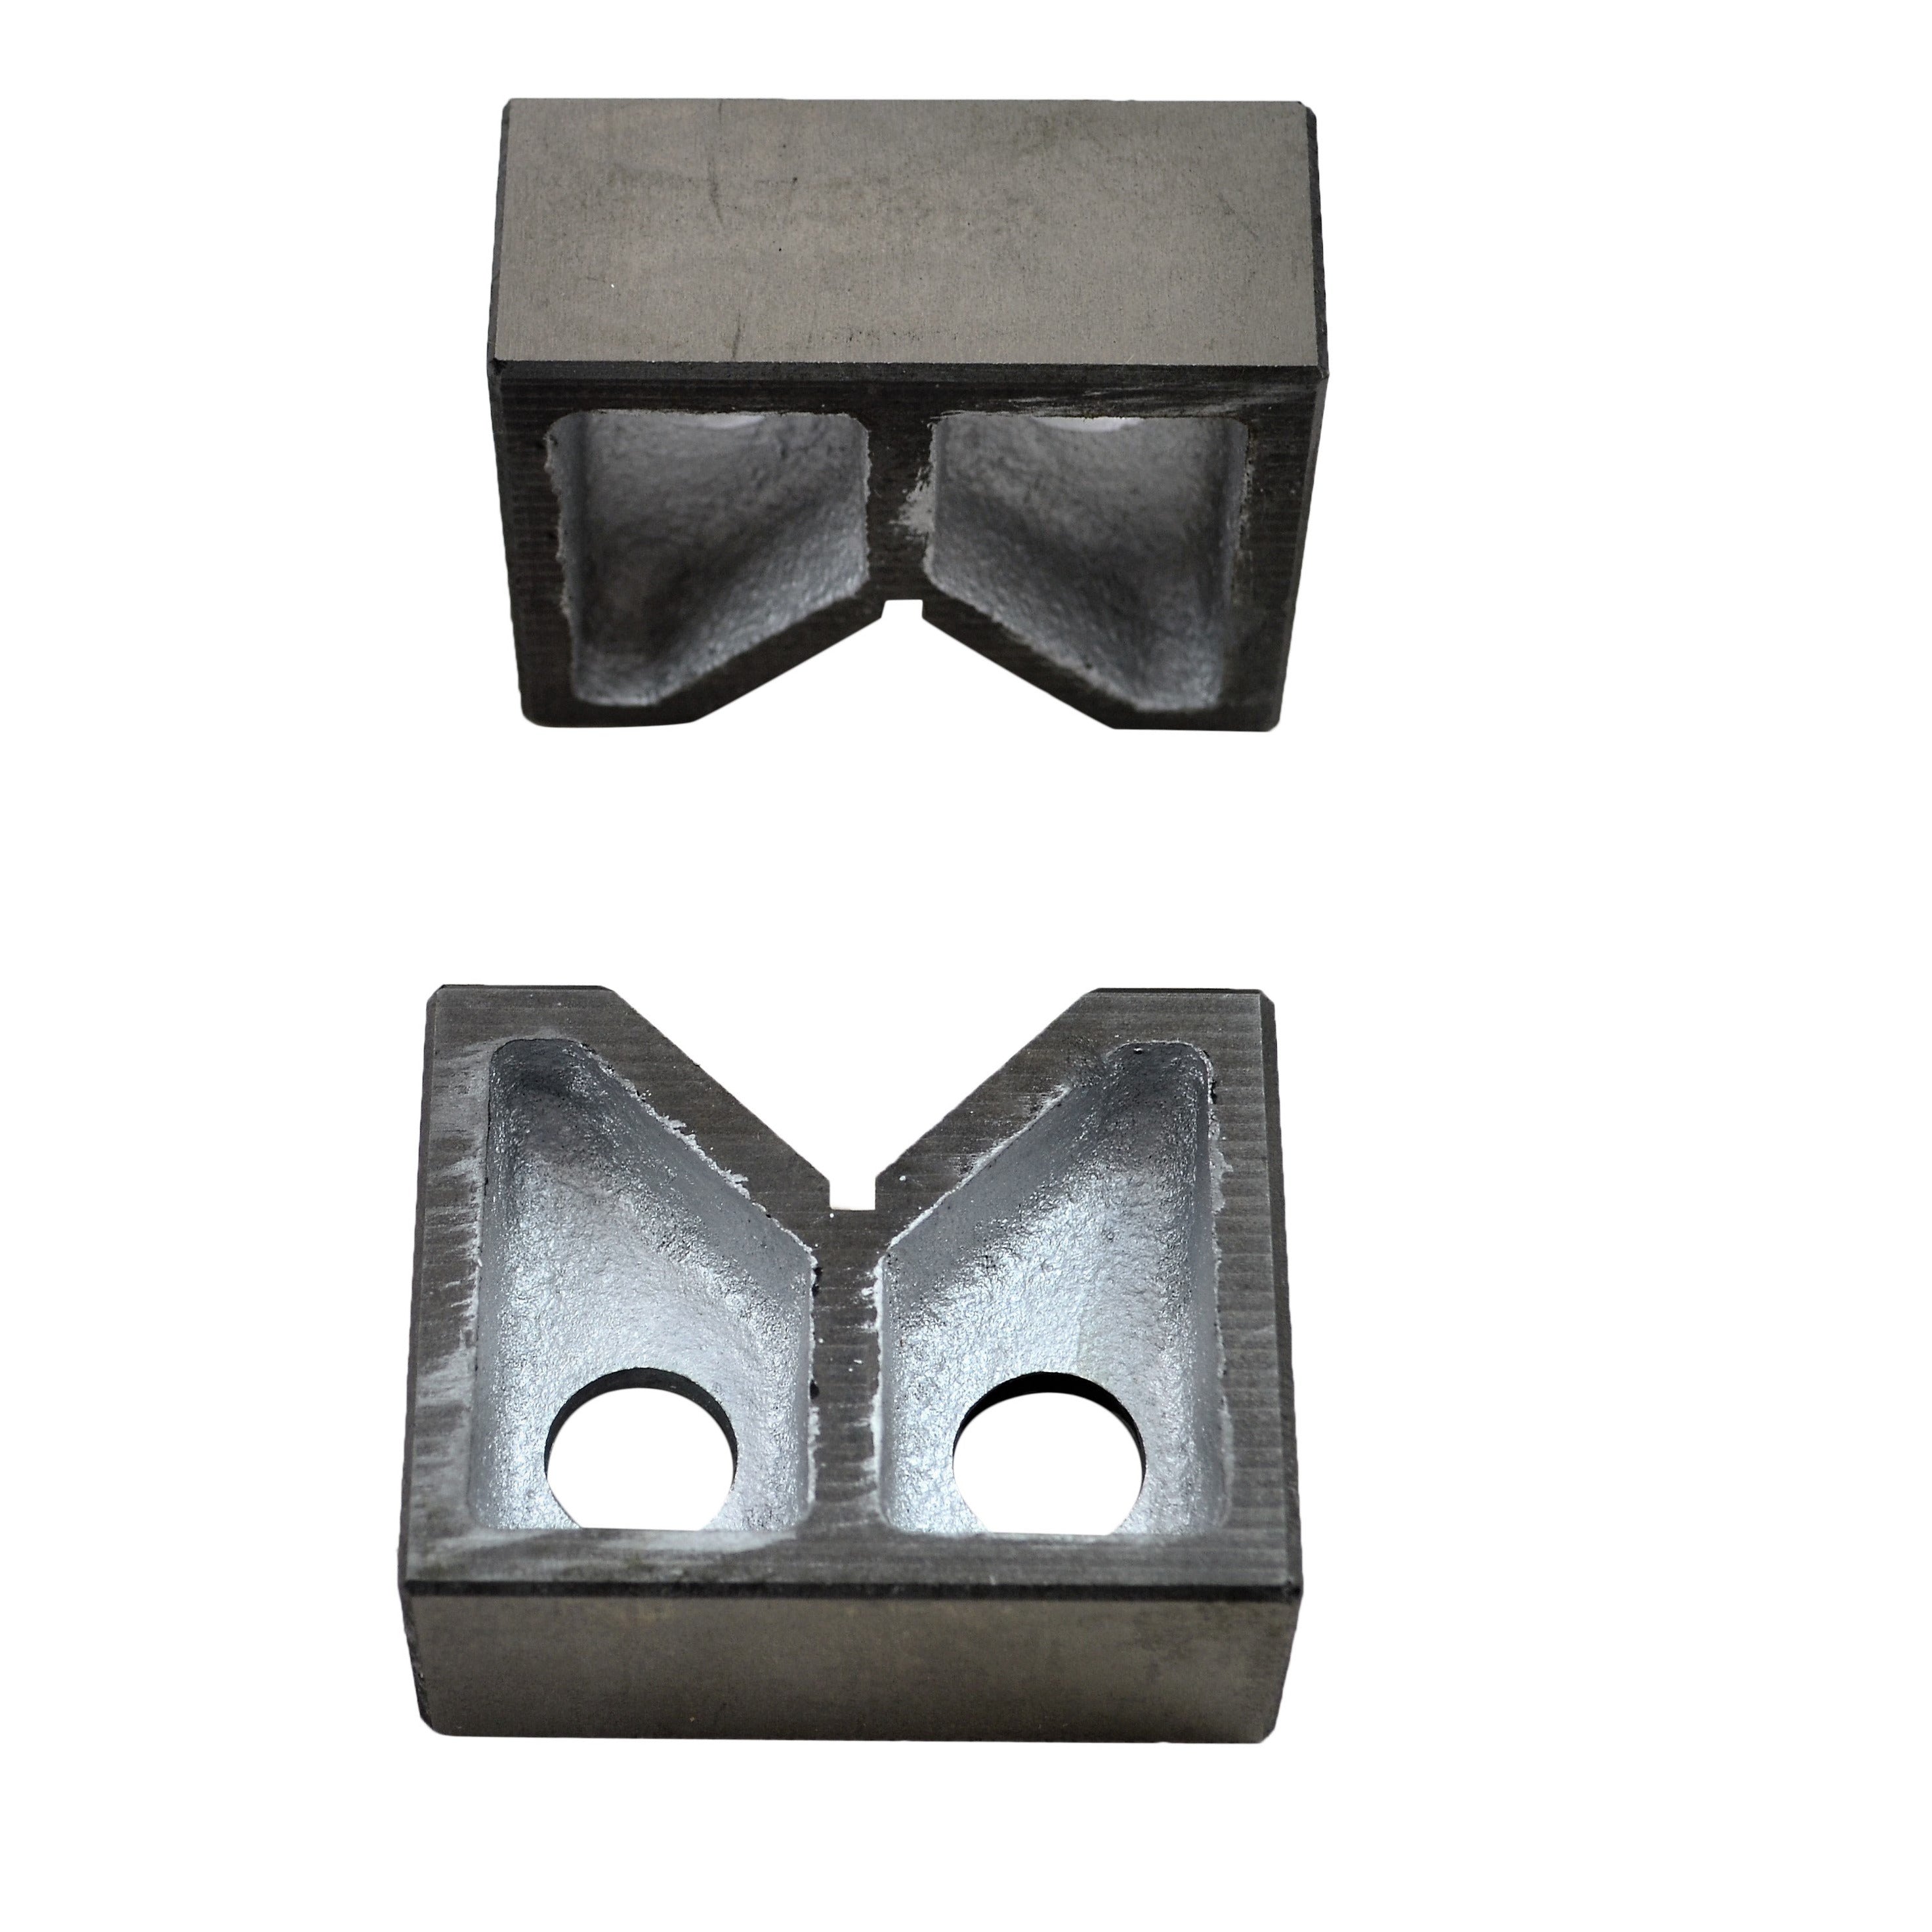 3" cast iron angle v block B3 matched pair machining milling cnc measurement metalwork industrial